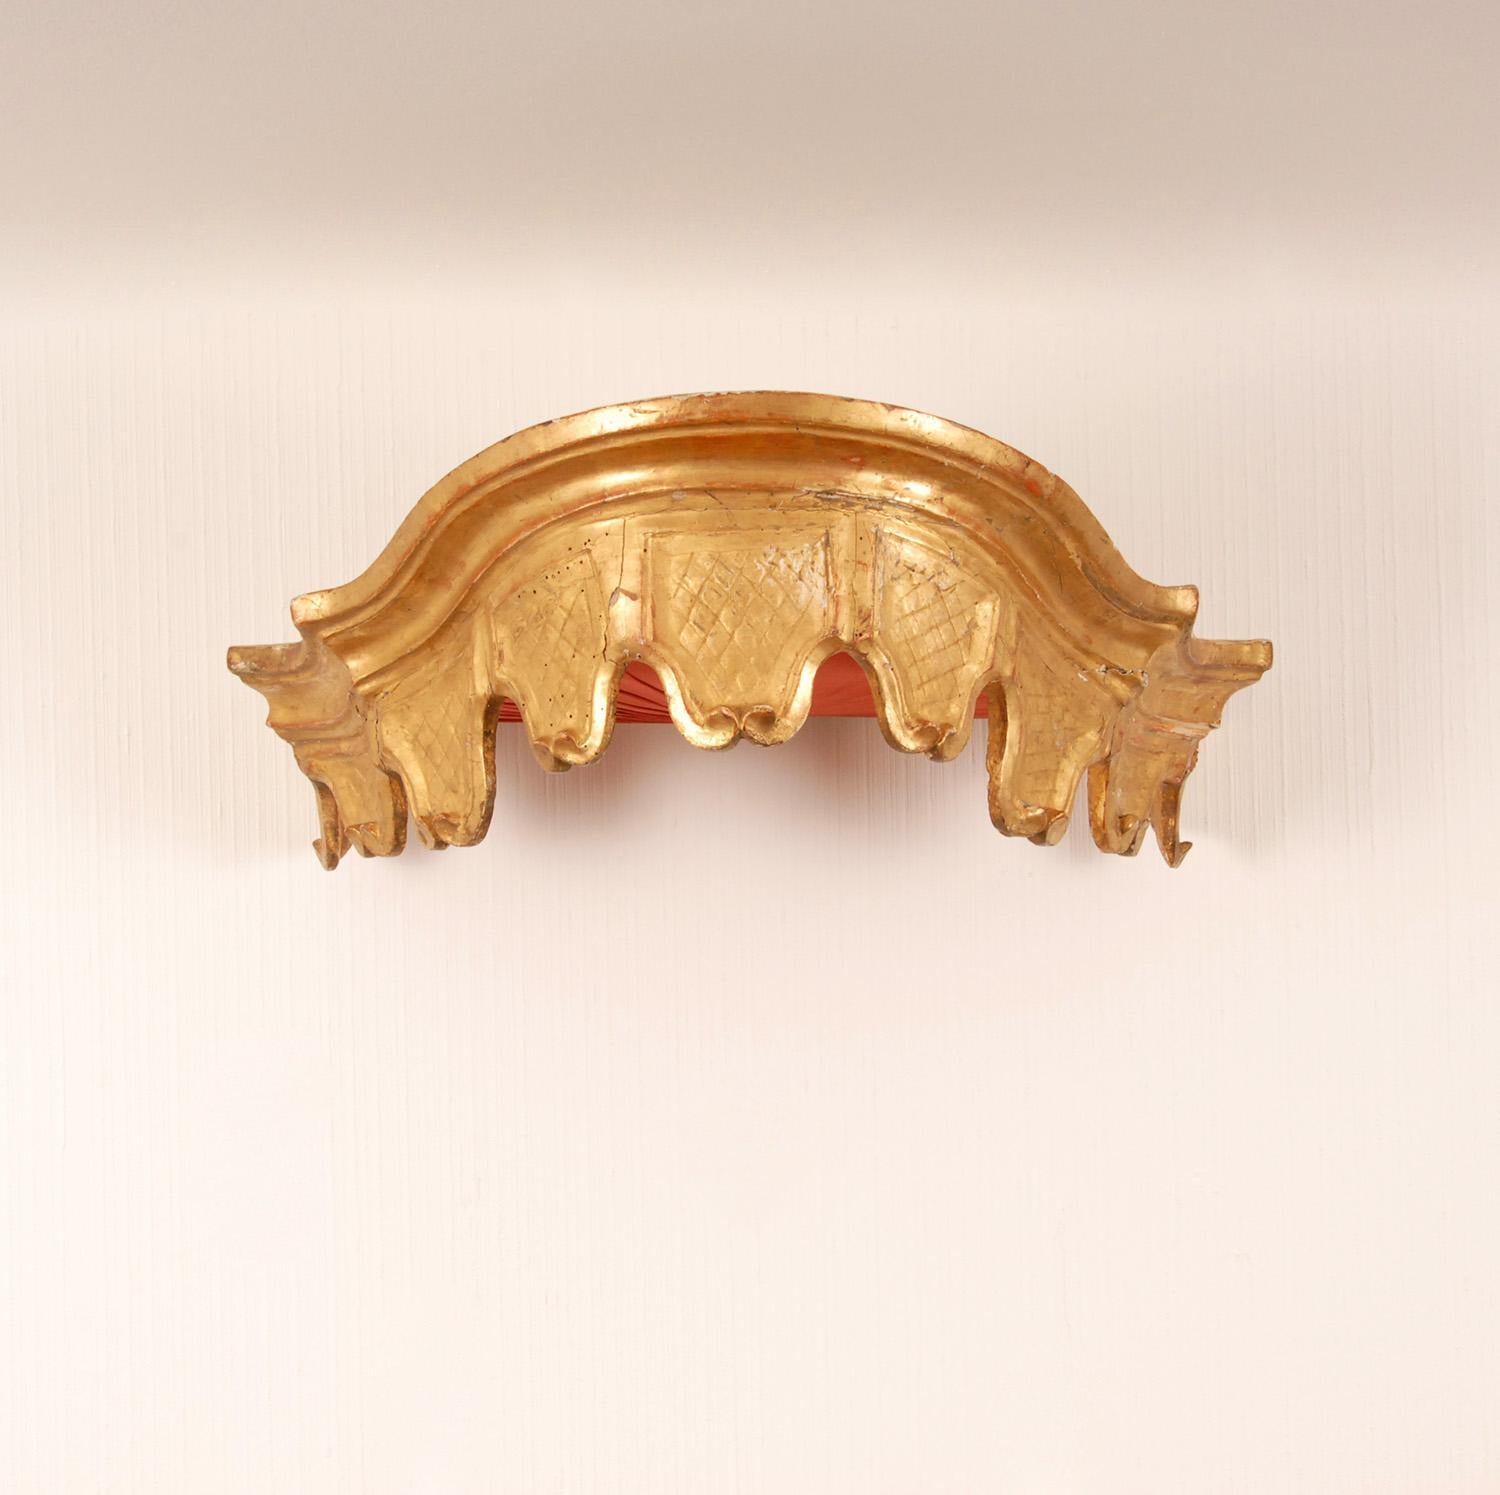 Neoclassical 18th Century French Country Style Carved Giltwood Crown Bed Canopy Ornament